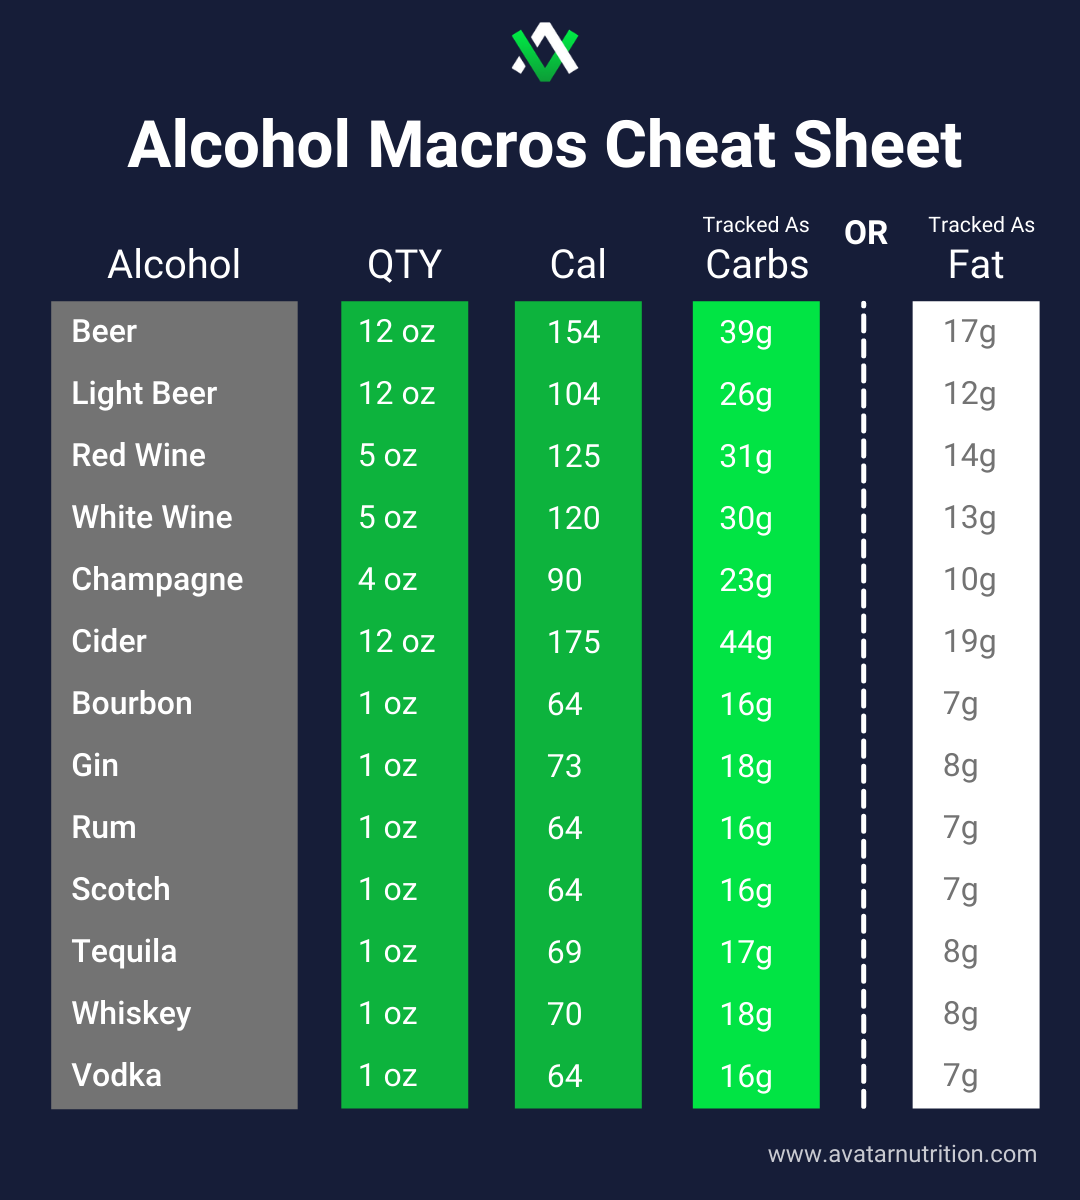 Is Alcohol a Macronutrient?